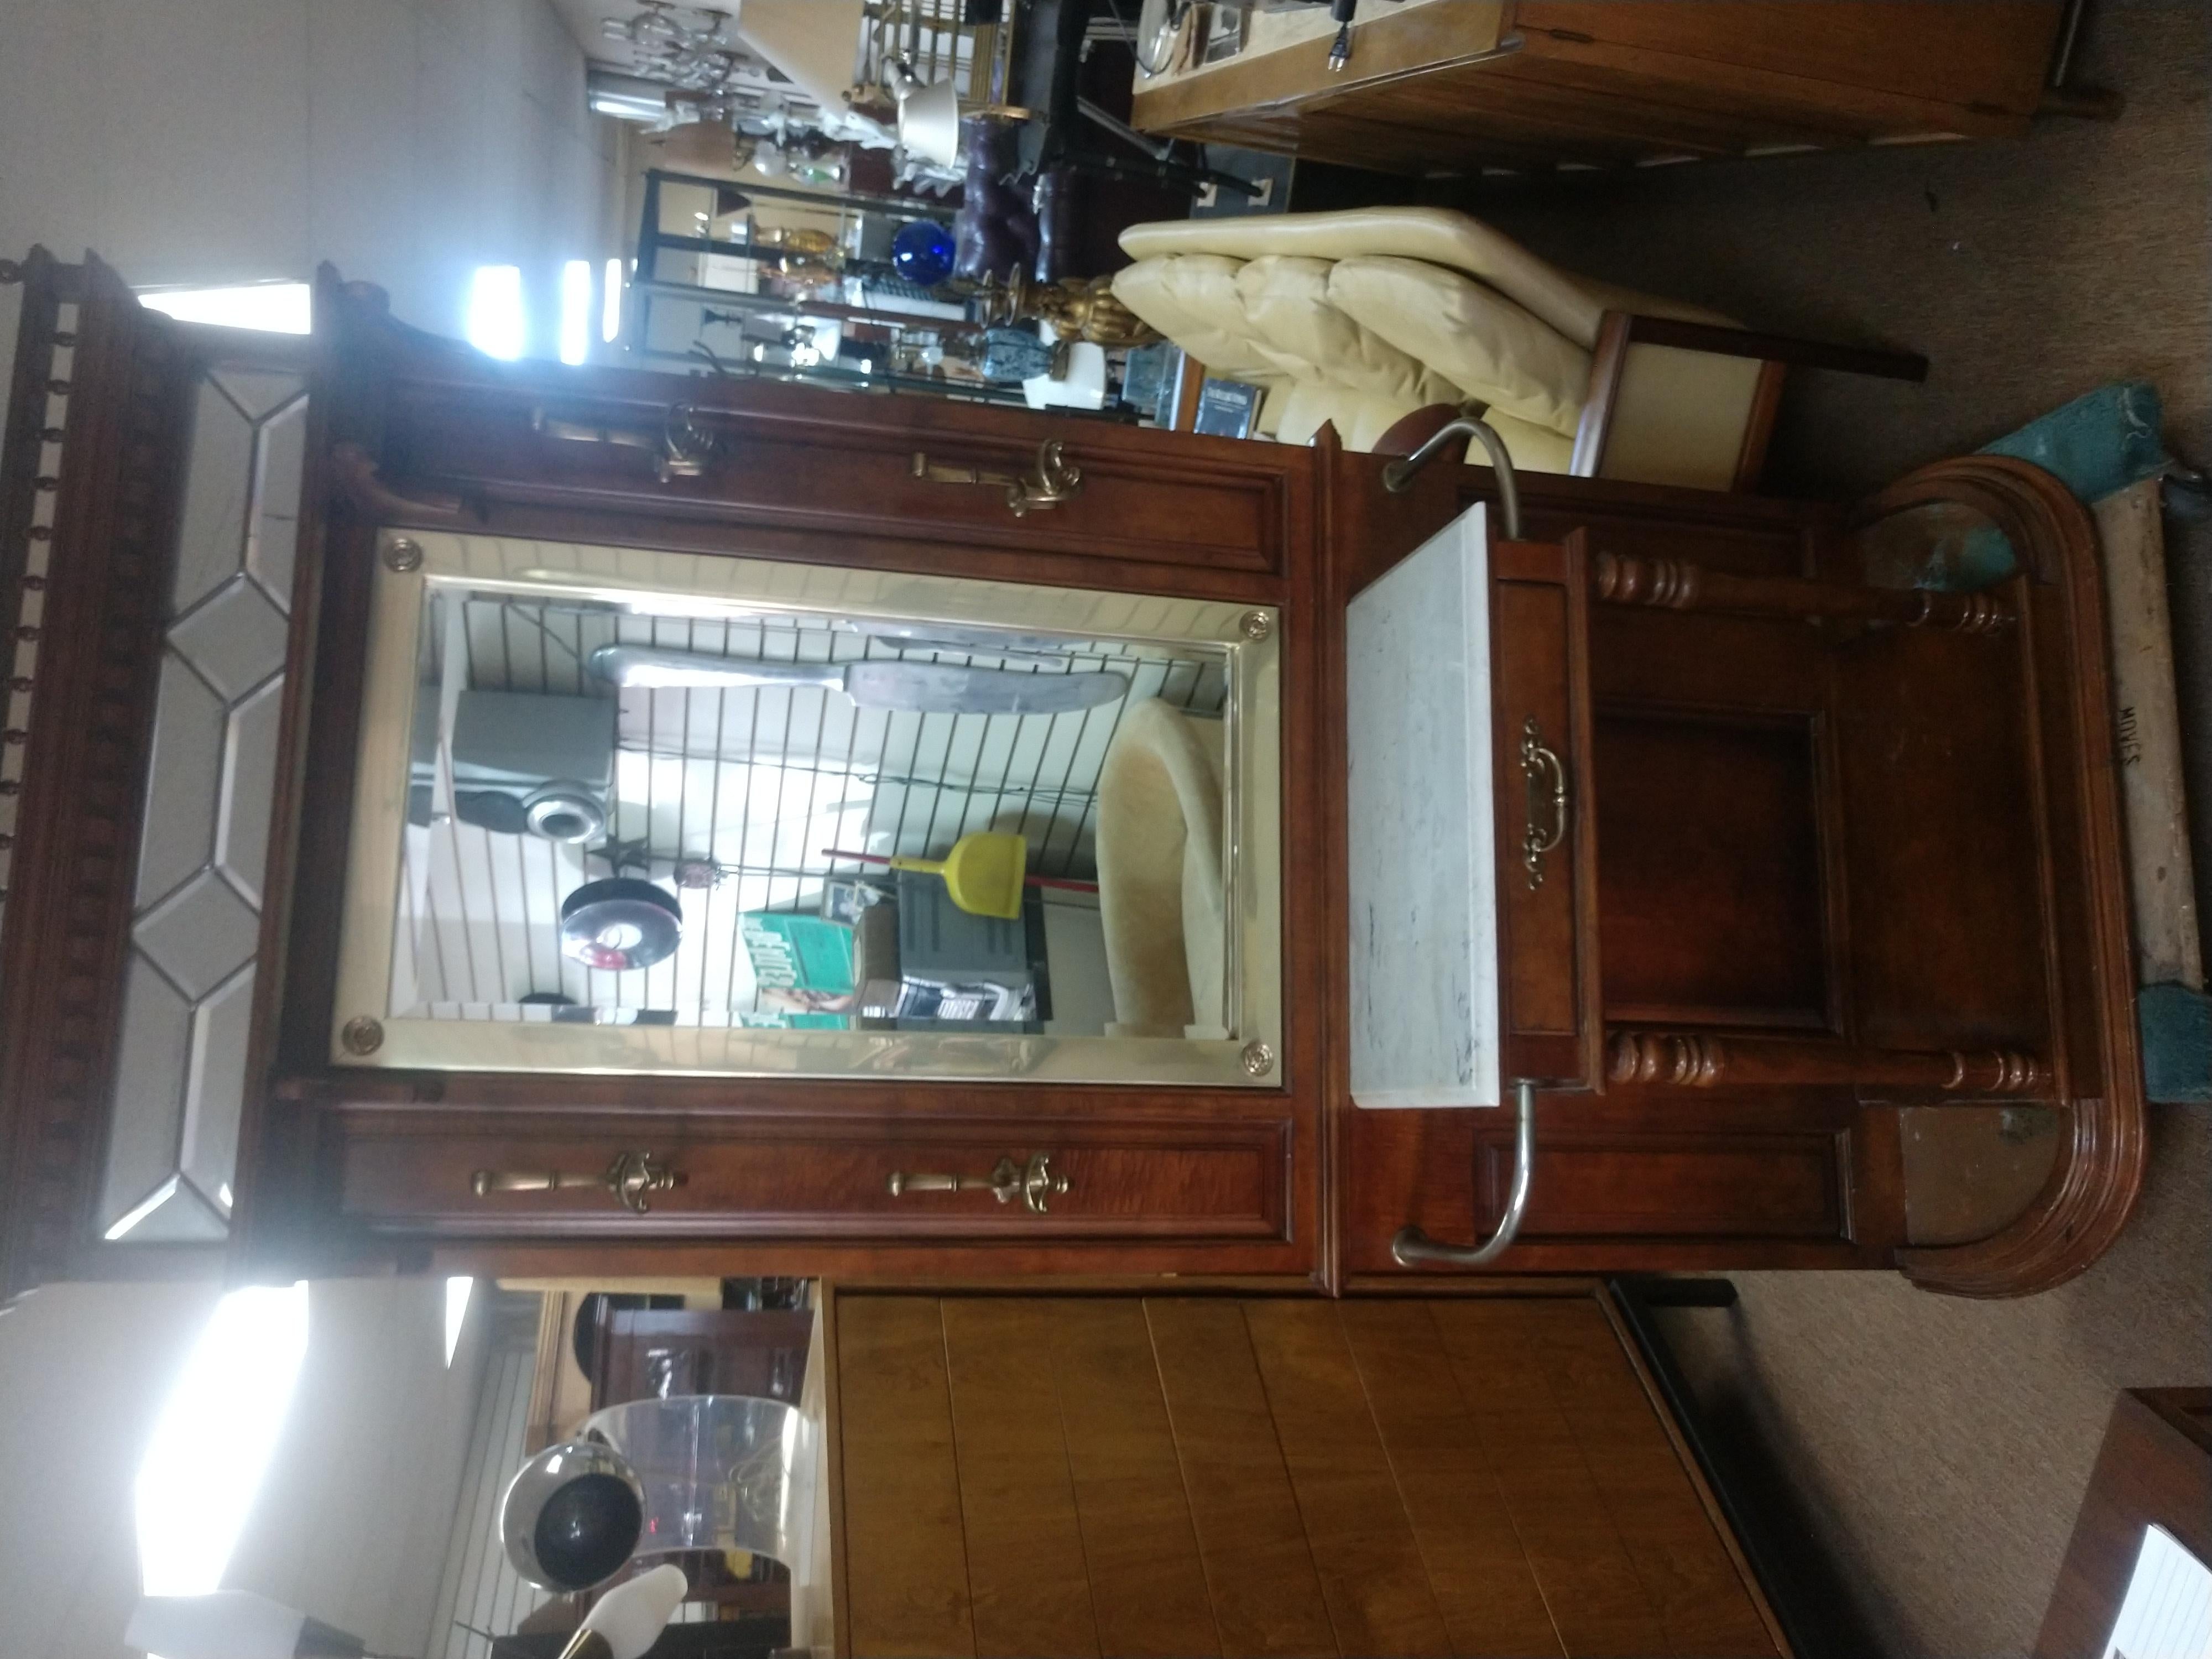 Fabulous style with so many functions. 4 coat hooks, drawer for storage umbrella or cane holders, hat rack shelf and a large brass framed mirror.
Top has a beveled leaded glass mirror above the caned hat rack shelf. Drawer for keys and gloves. Wood